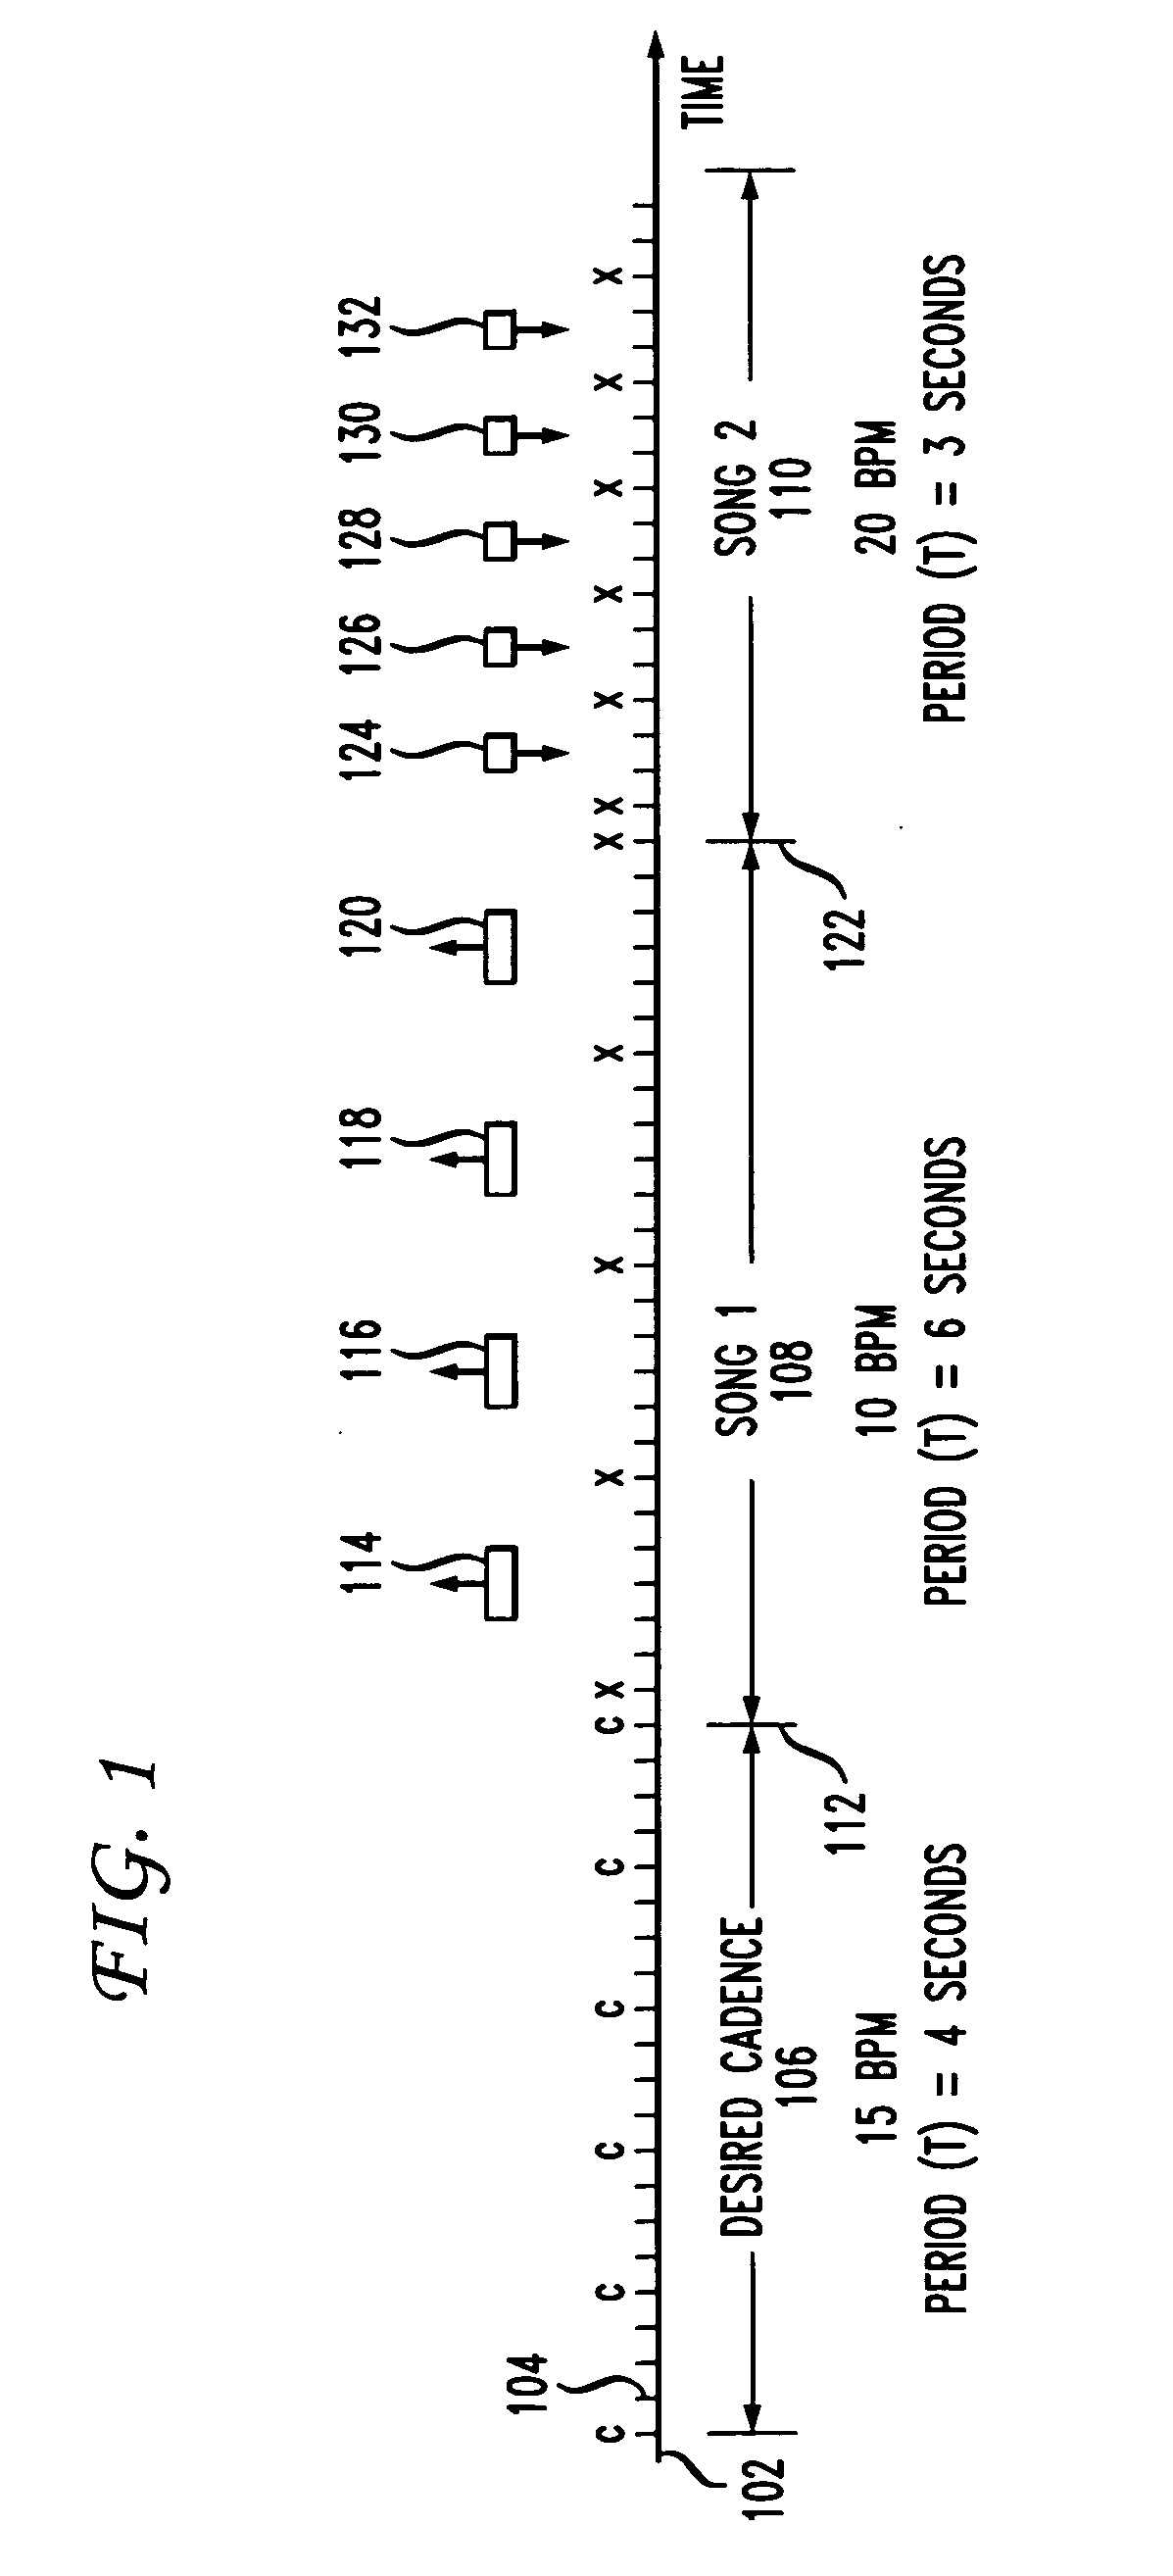 Method and apparatus for adjusting the cadence of music on a personal audio device